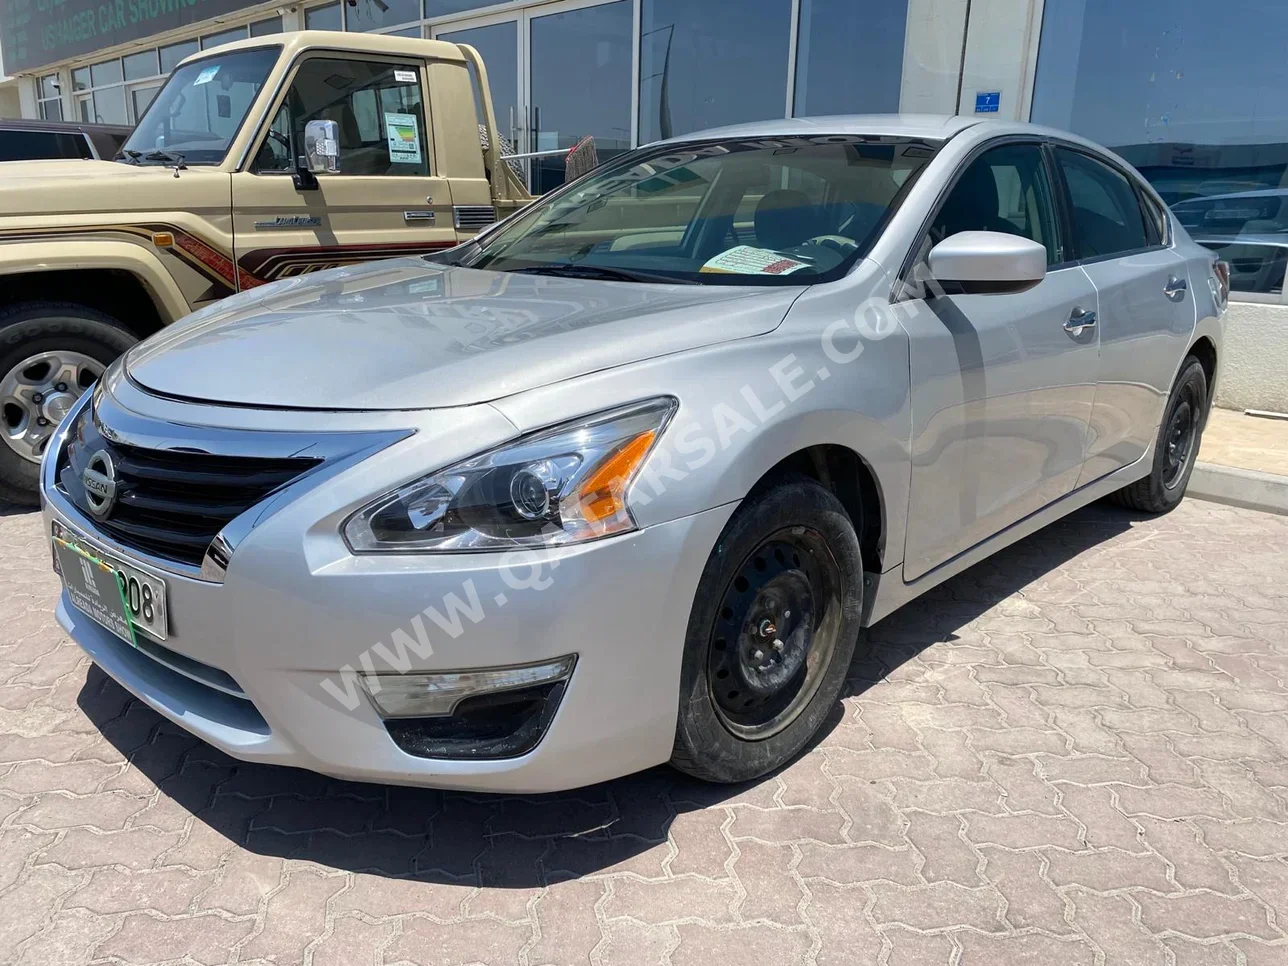 Nissan  Altima  2.5 S  2015  Automatic  256,000 Km  4 Cylinder  Front Wheel Drive (FWD)  Sedan  Silver